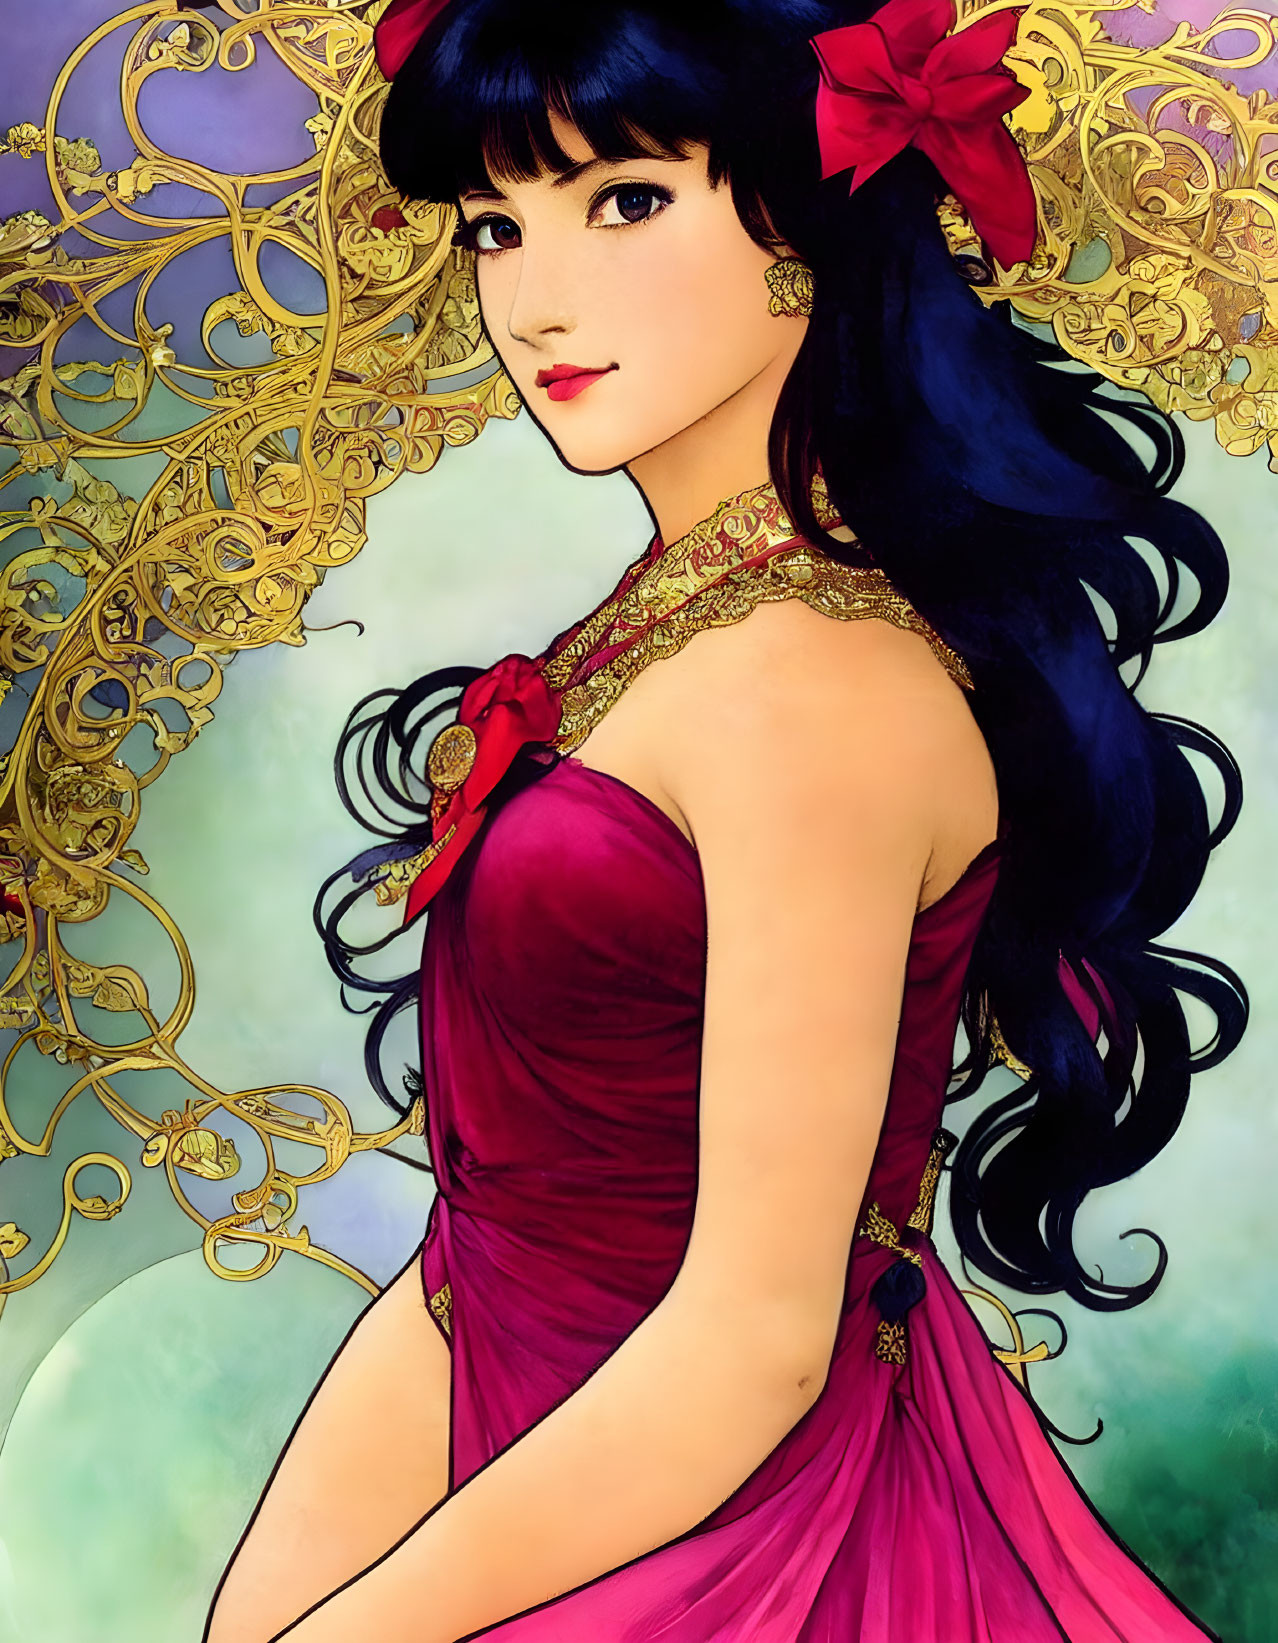 Stylized illustration of woman with long black hair in pink dress